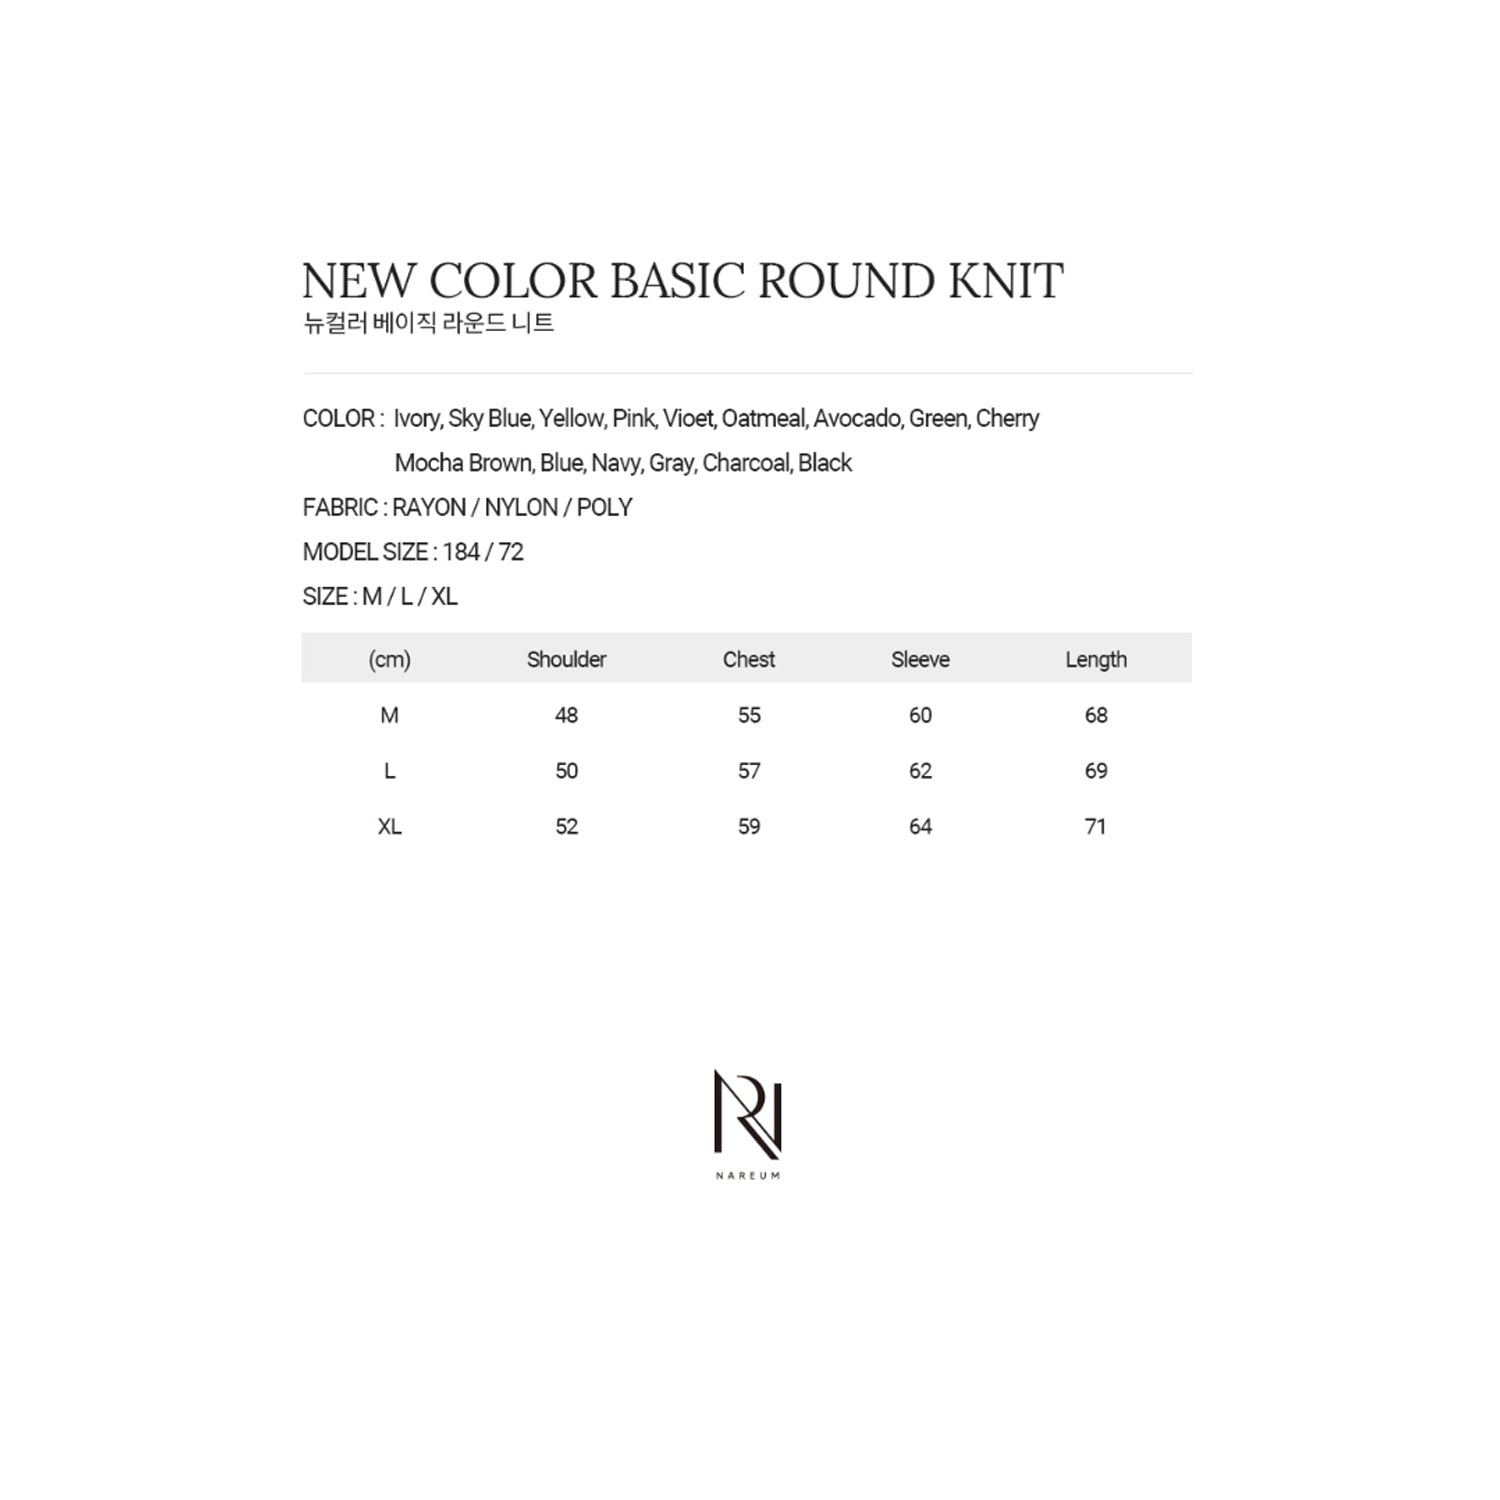 NEW COLOR BASIC ROUND KNIT